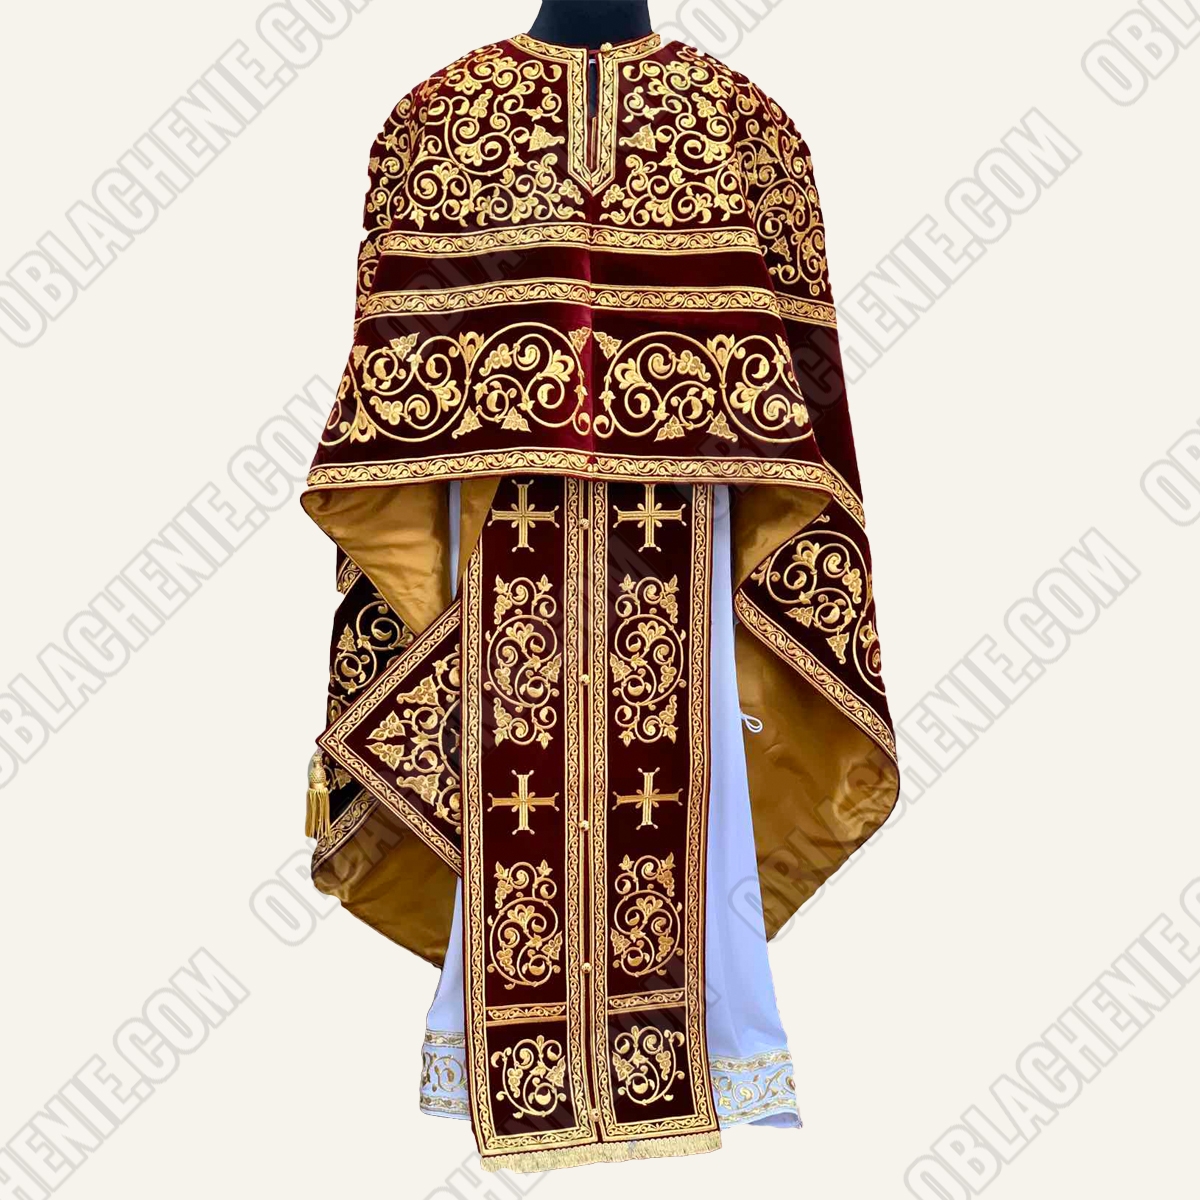 EMBROIDERED PRIEST'S VESTMENTS 11077